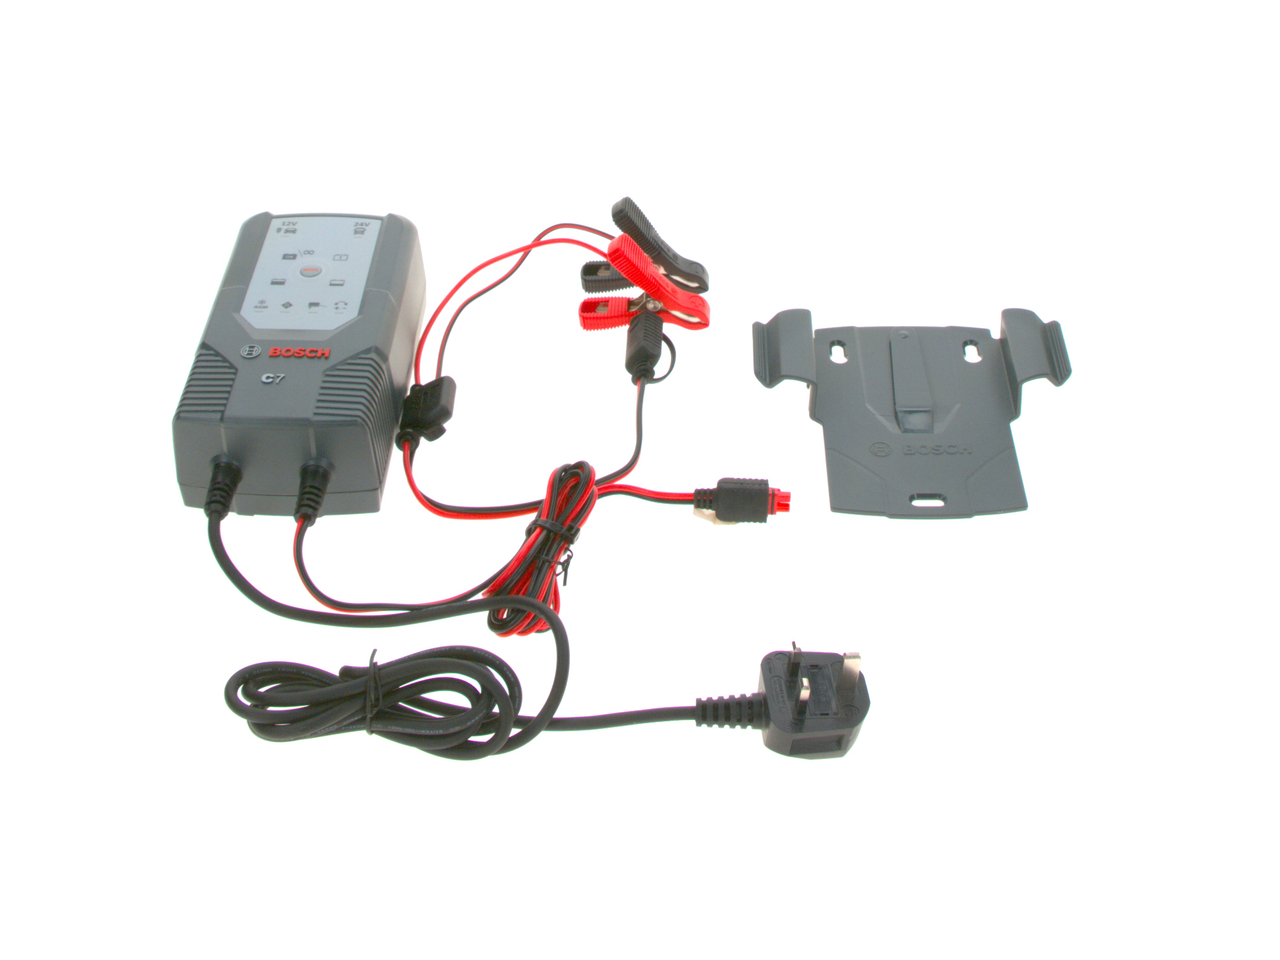 Battery chargers Battery charger, charging current 10A, charging voltage 12V, power source voltage 230v  Art. 018999907M